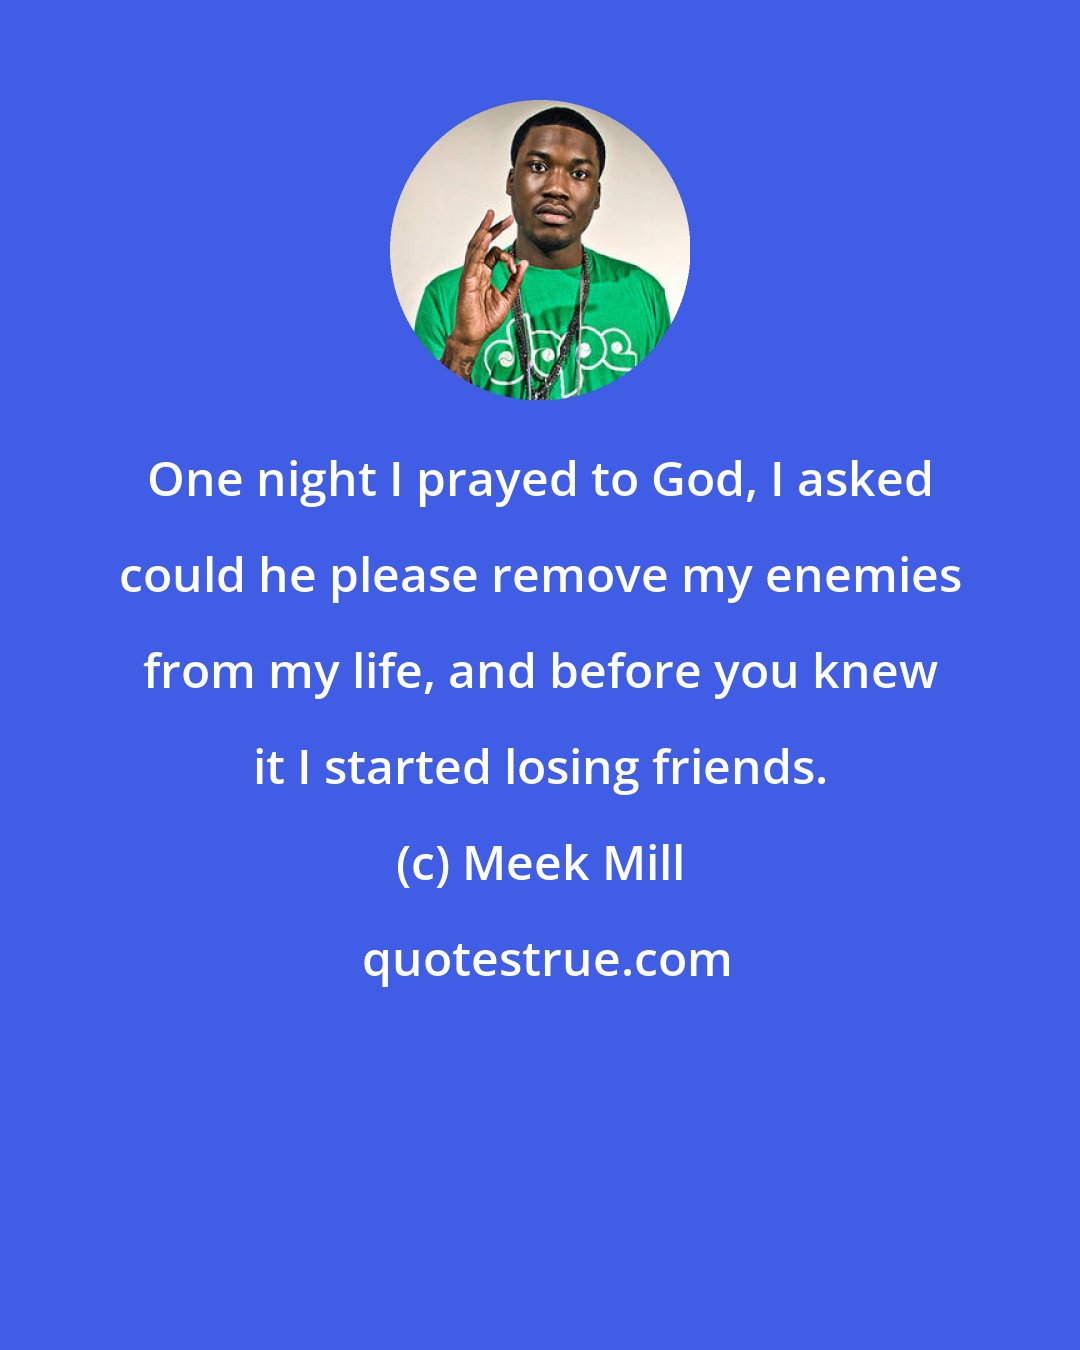 Meek Mill: One night I prayed to God, I asked could he please remove my enemies from my life, and before you knew it I started losing friends.